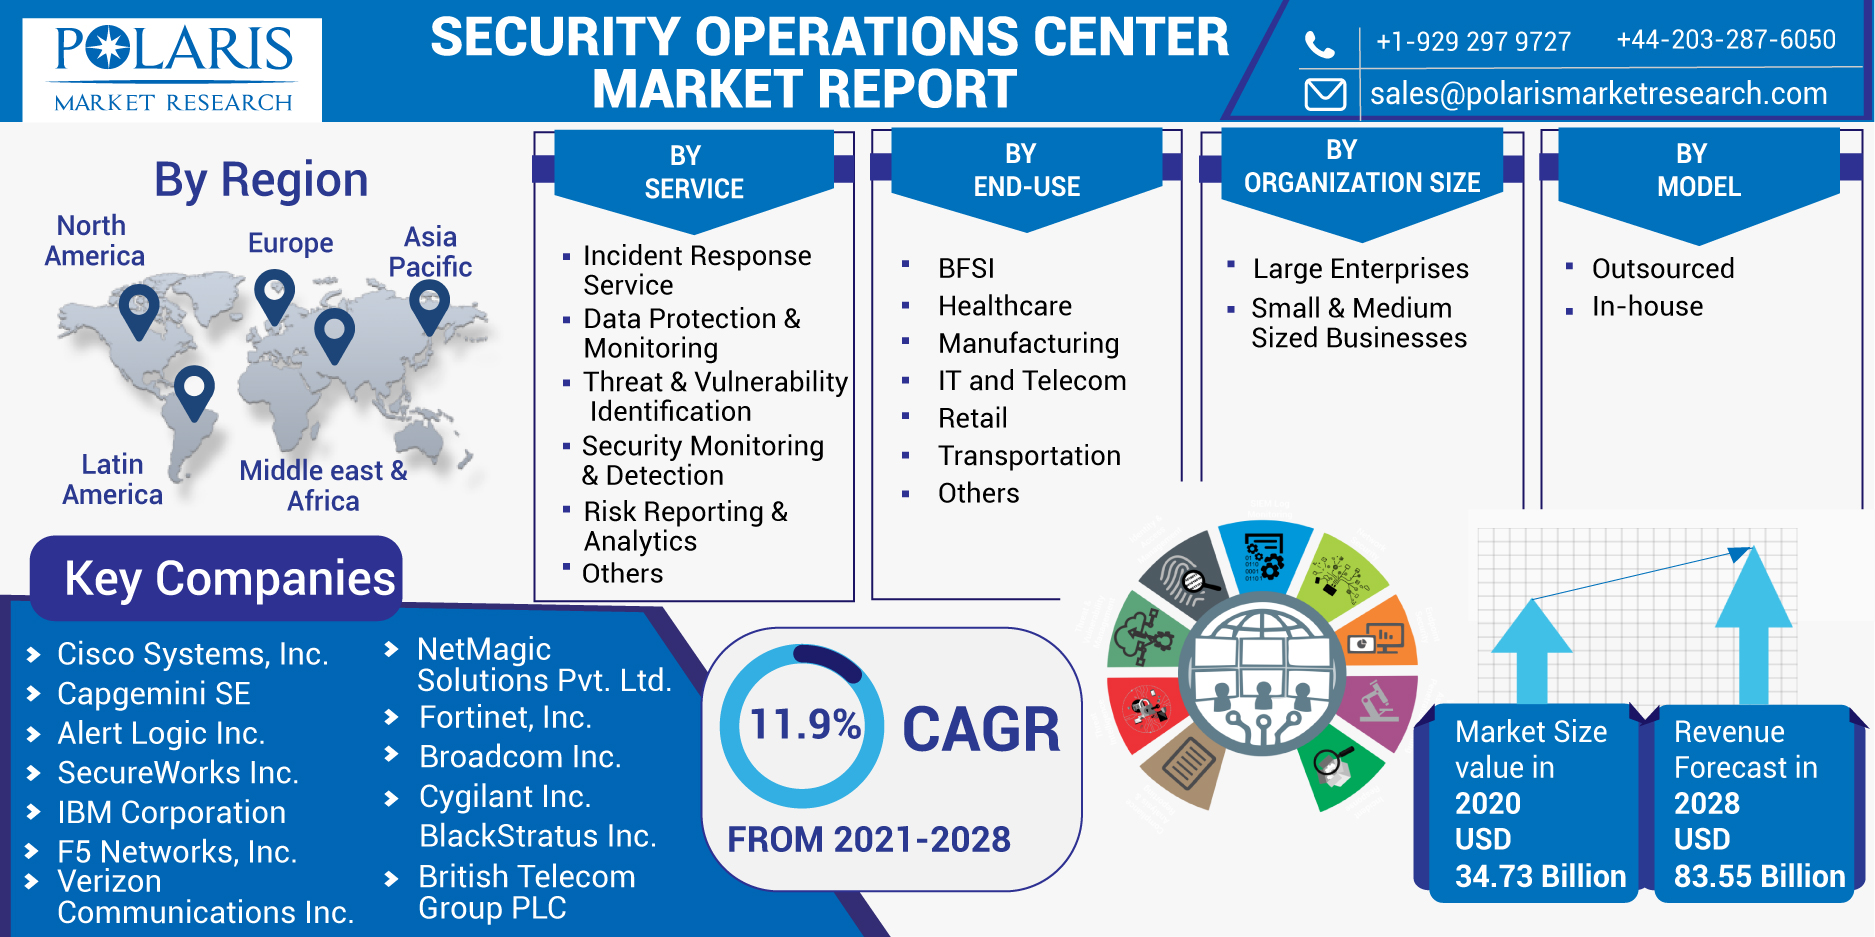 SECURITY_OPERATIONS_CENTER_MARKET-0110